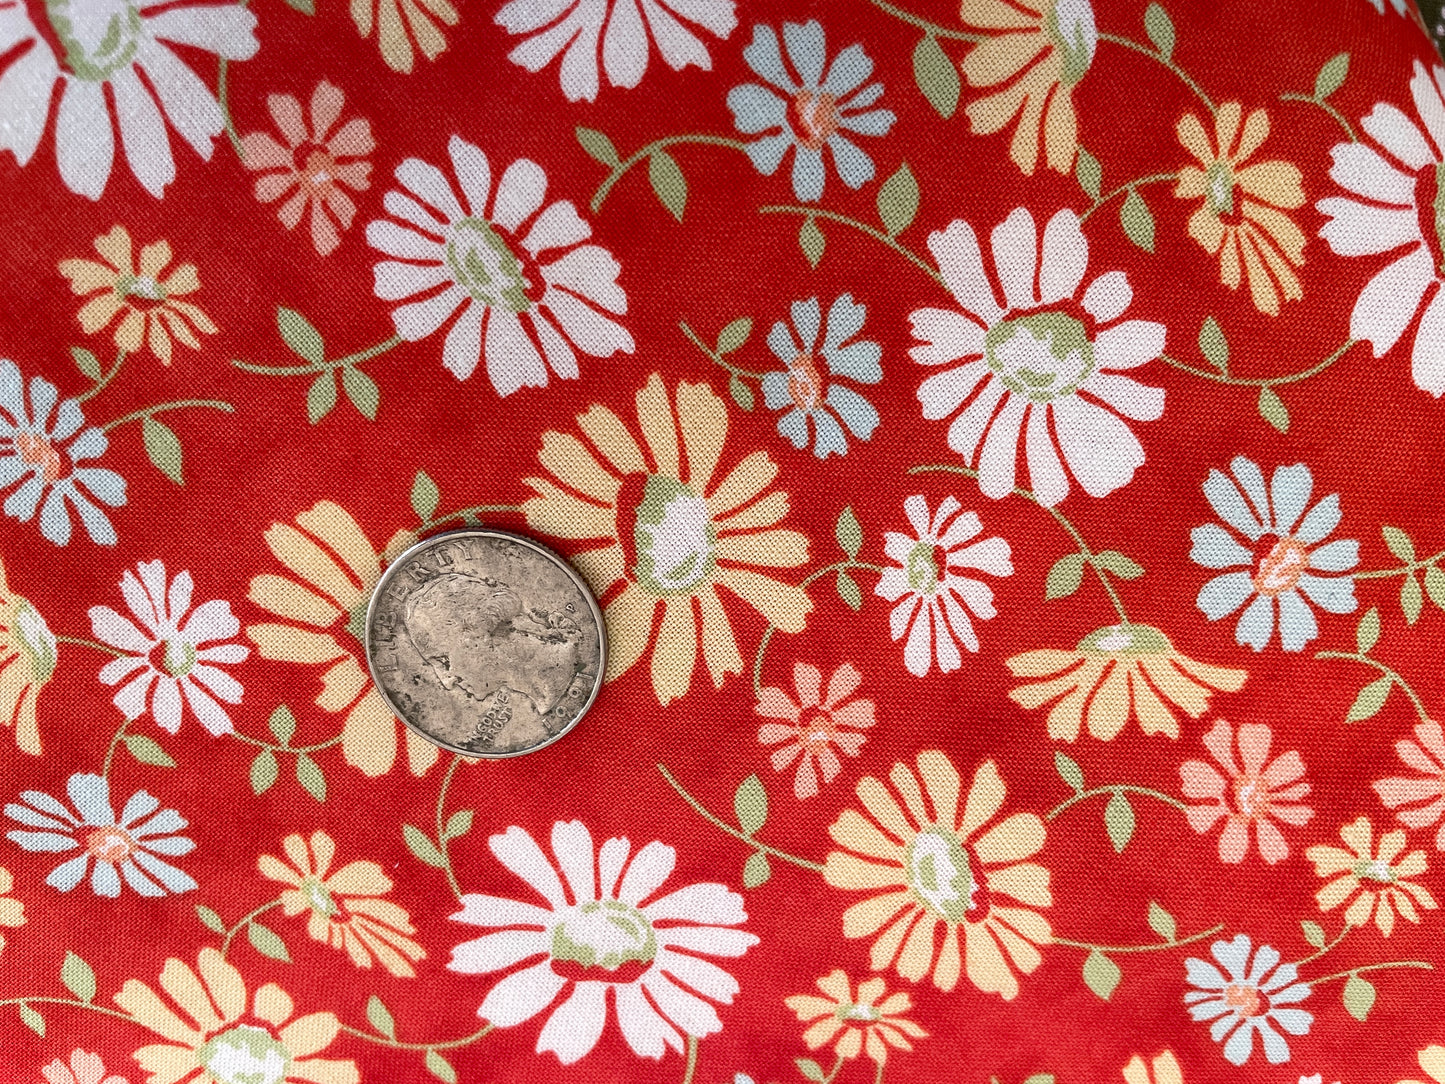 100% Cotton - Quilting Weight - Daisies on Red